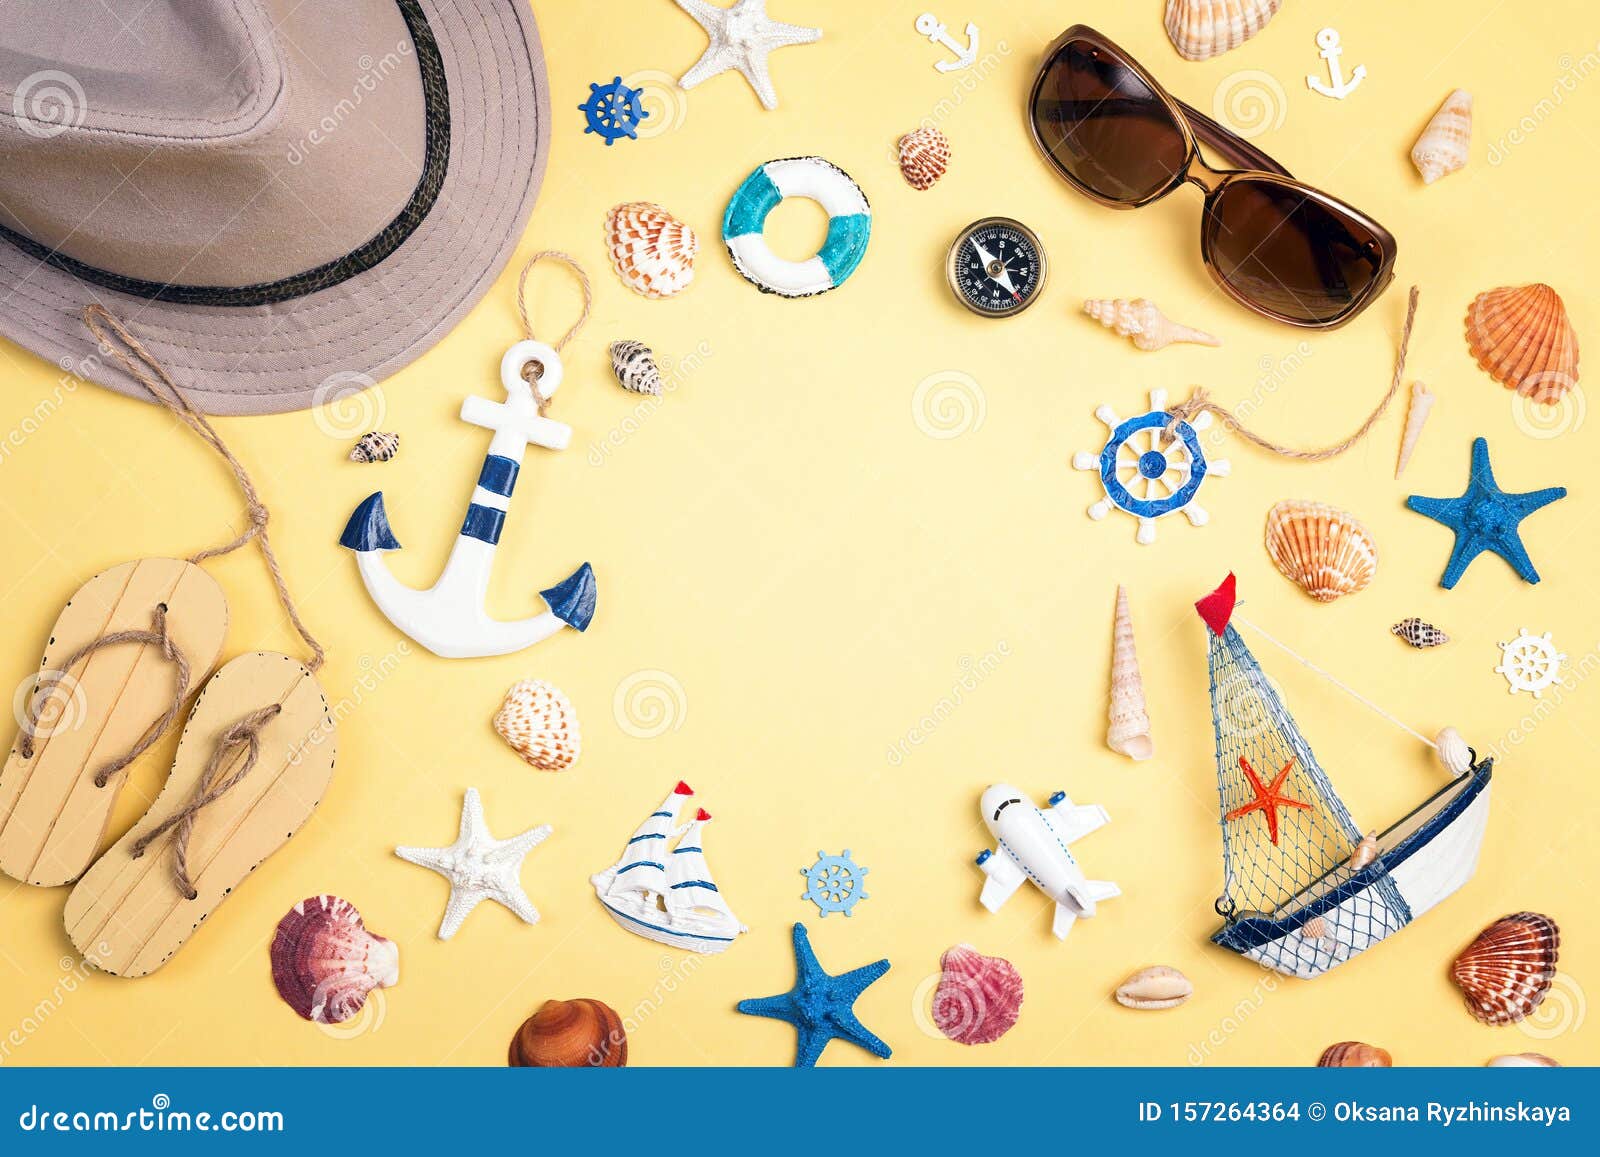 Border of Vacation Accessories and Symbols on a Yellow Background with ...